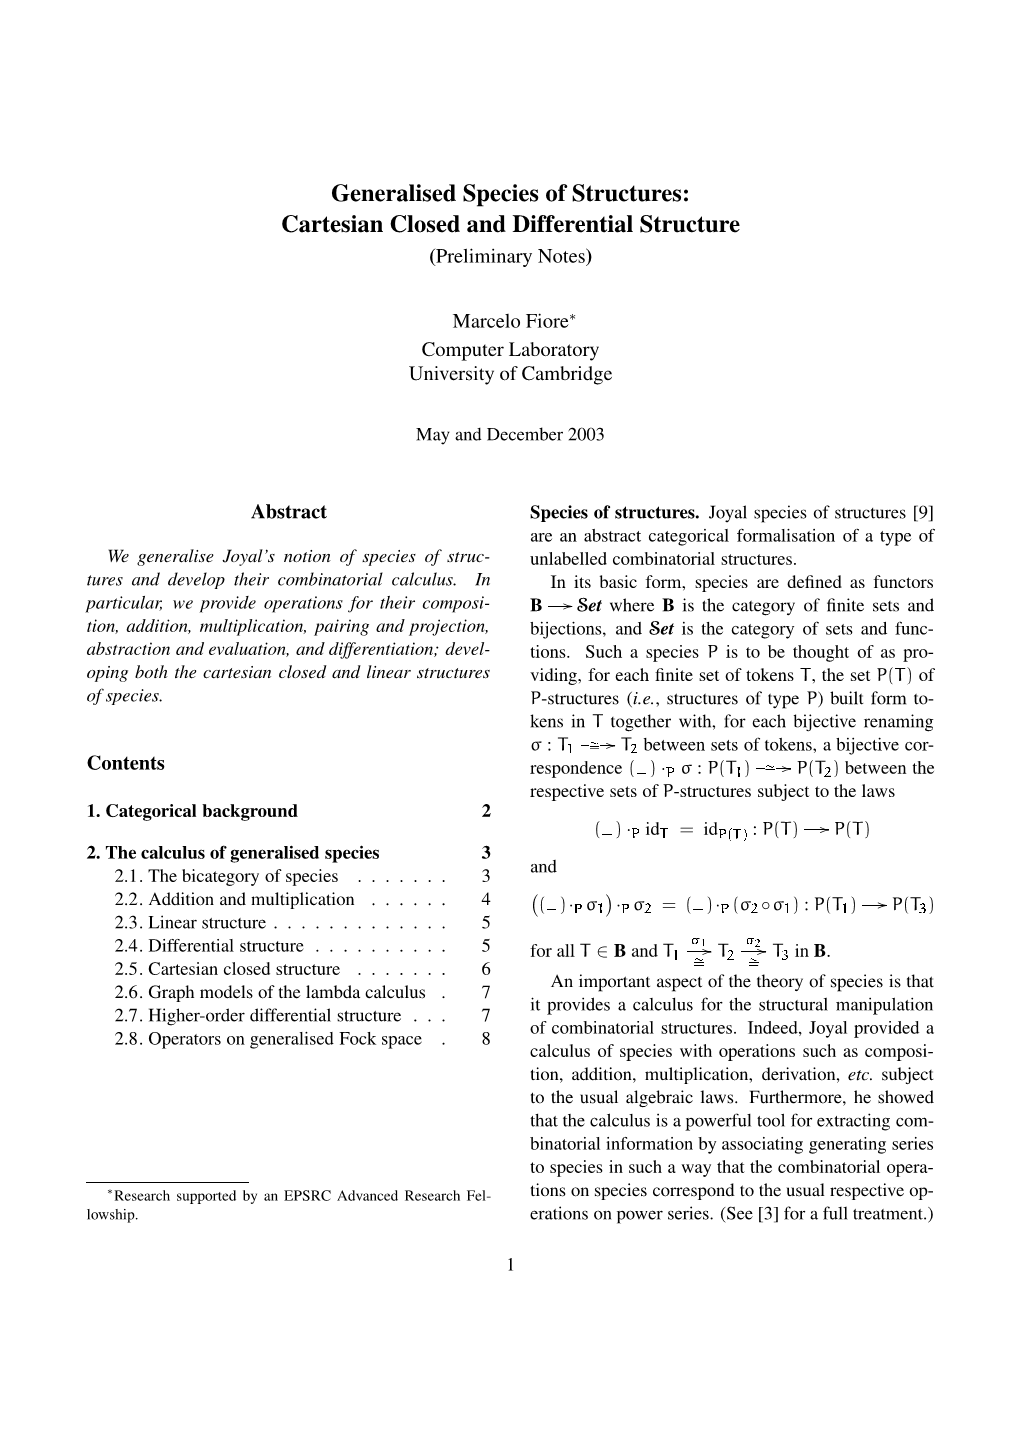 Generalised Species of Structures: Cartesian Closed and Differential Structure (Preliminary Notes)